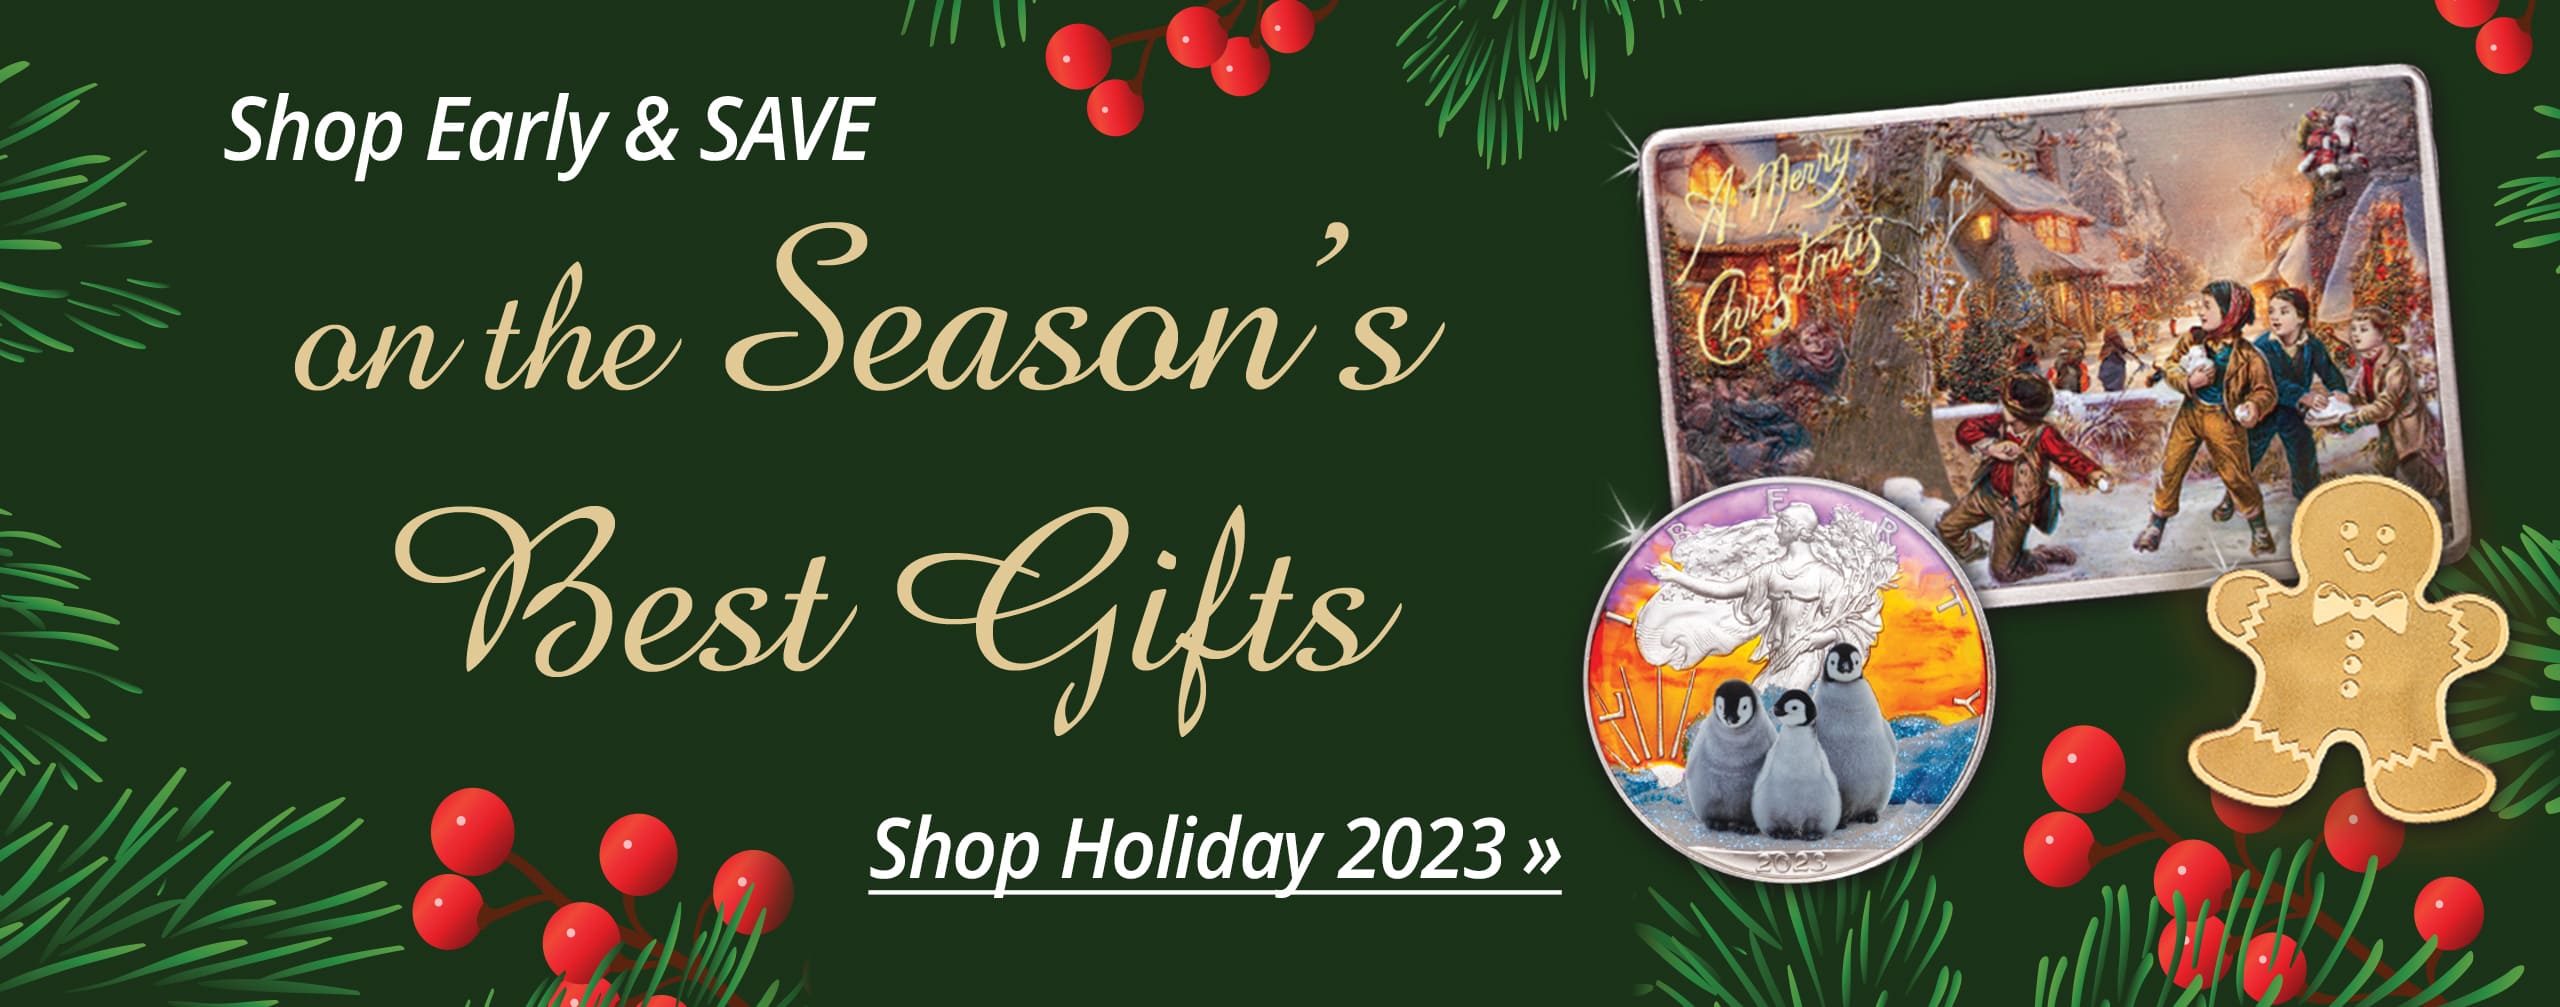 Shop Early and SAVE on the Season's Best Gifts - Shop Holiday 2023